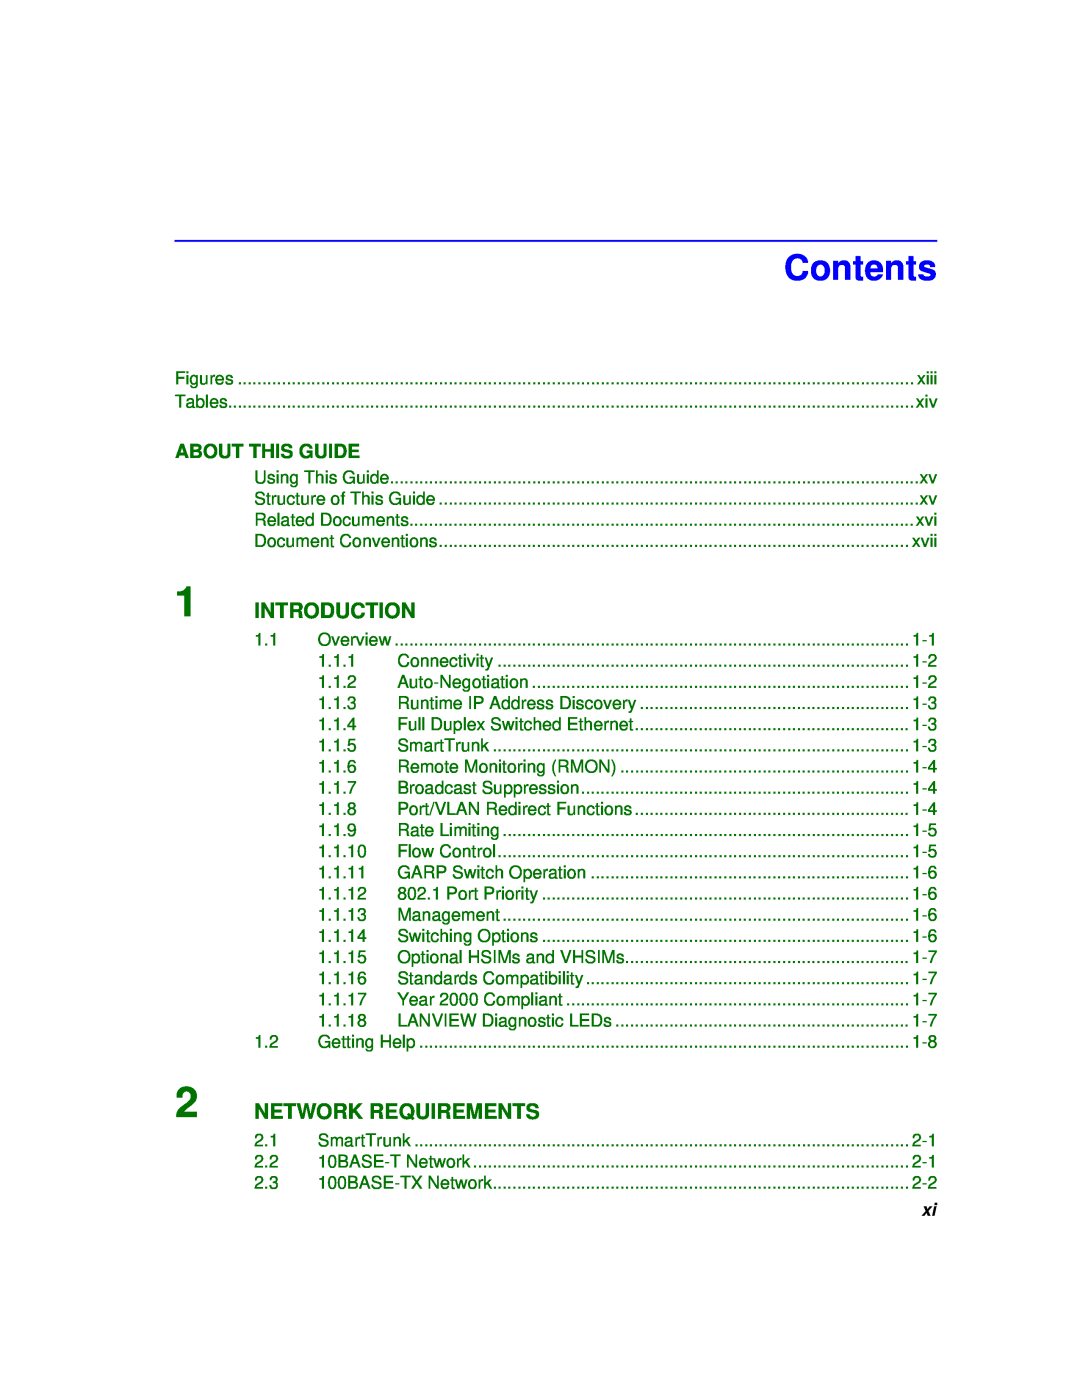 Cabletron Systems 2H253-25R manual Contents, Introduction, Network Requirements, About This Guide 